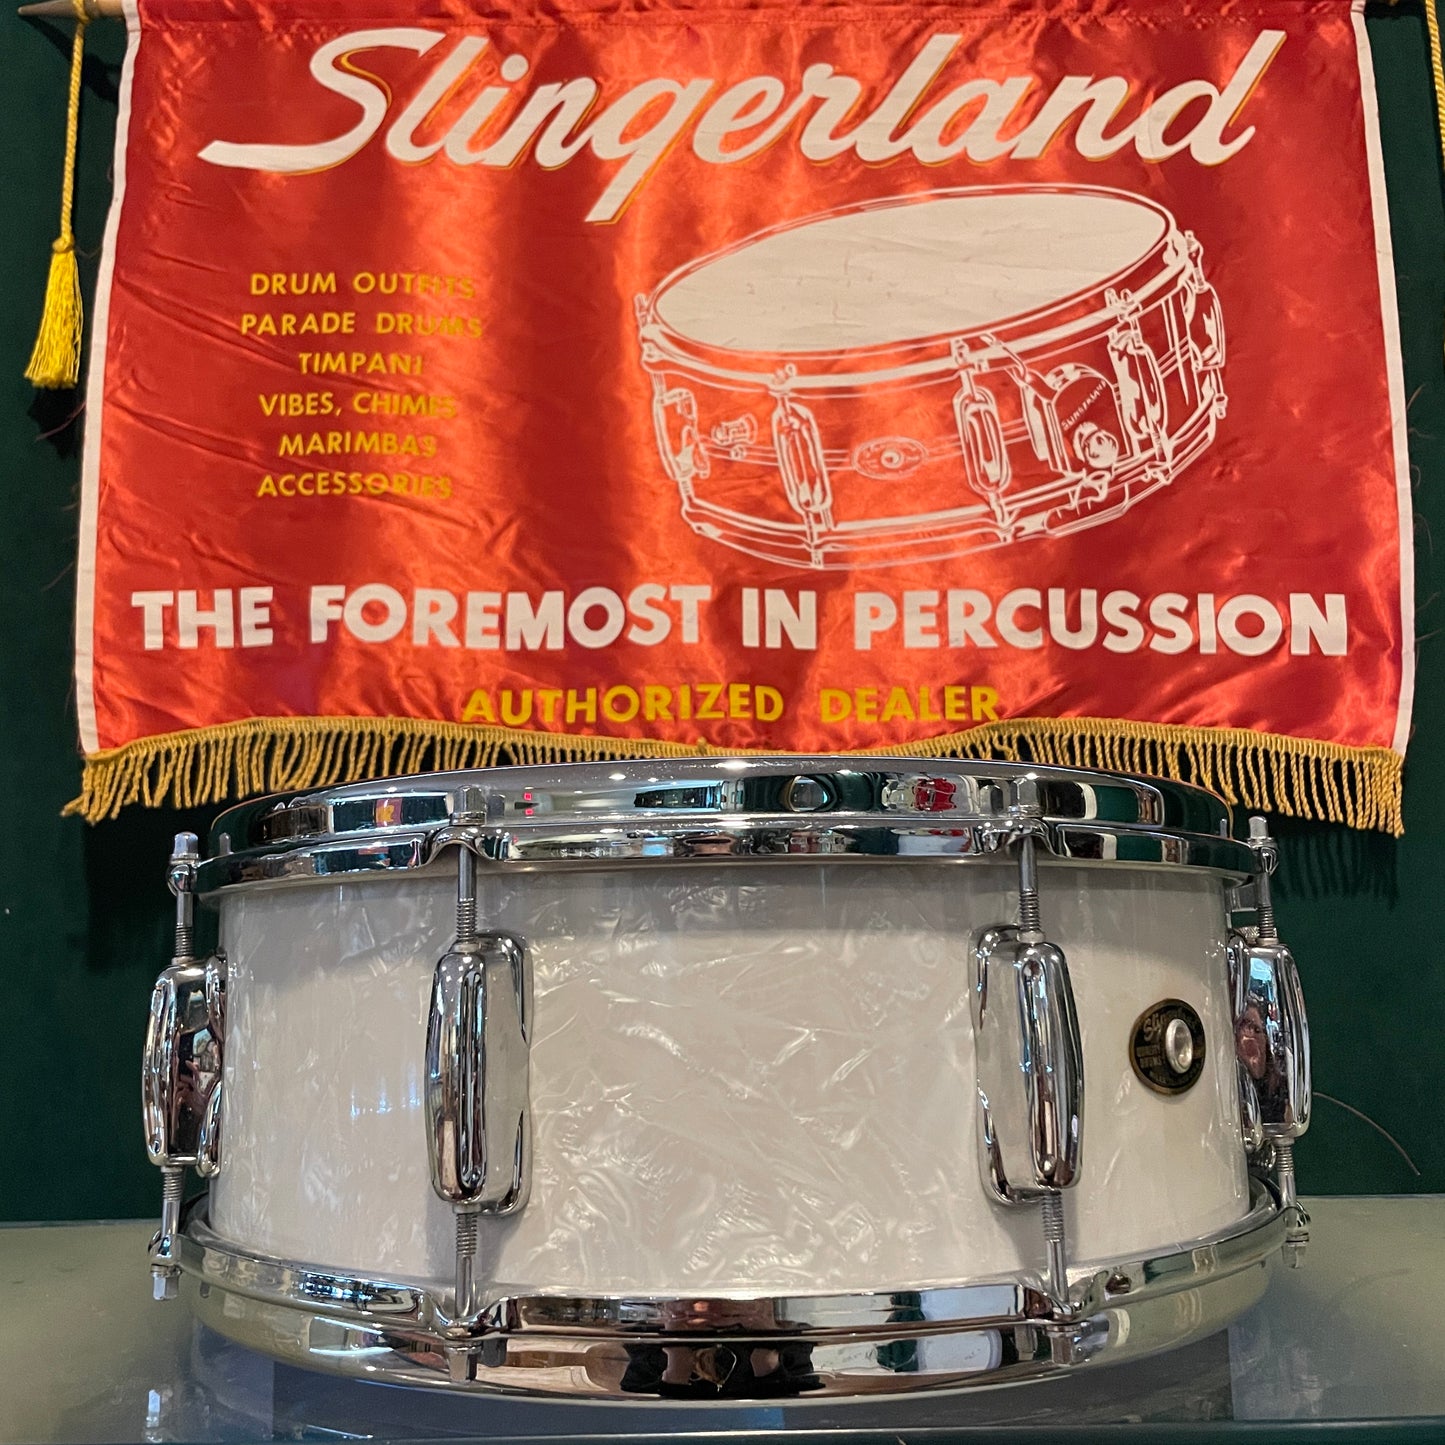 1962 Slingerland 5.5x14 No. 146 Hollywood Ace Snare Drum White Marine Pearl